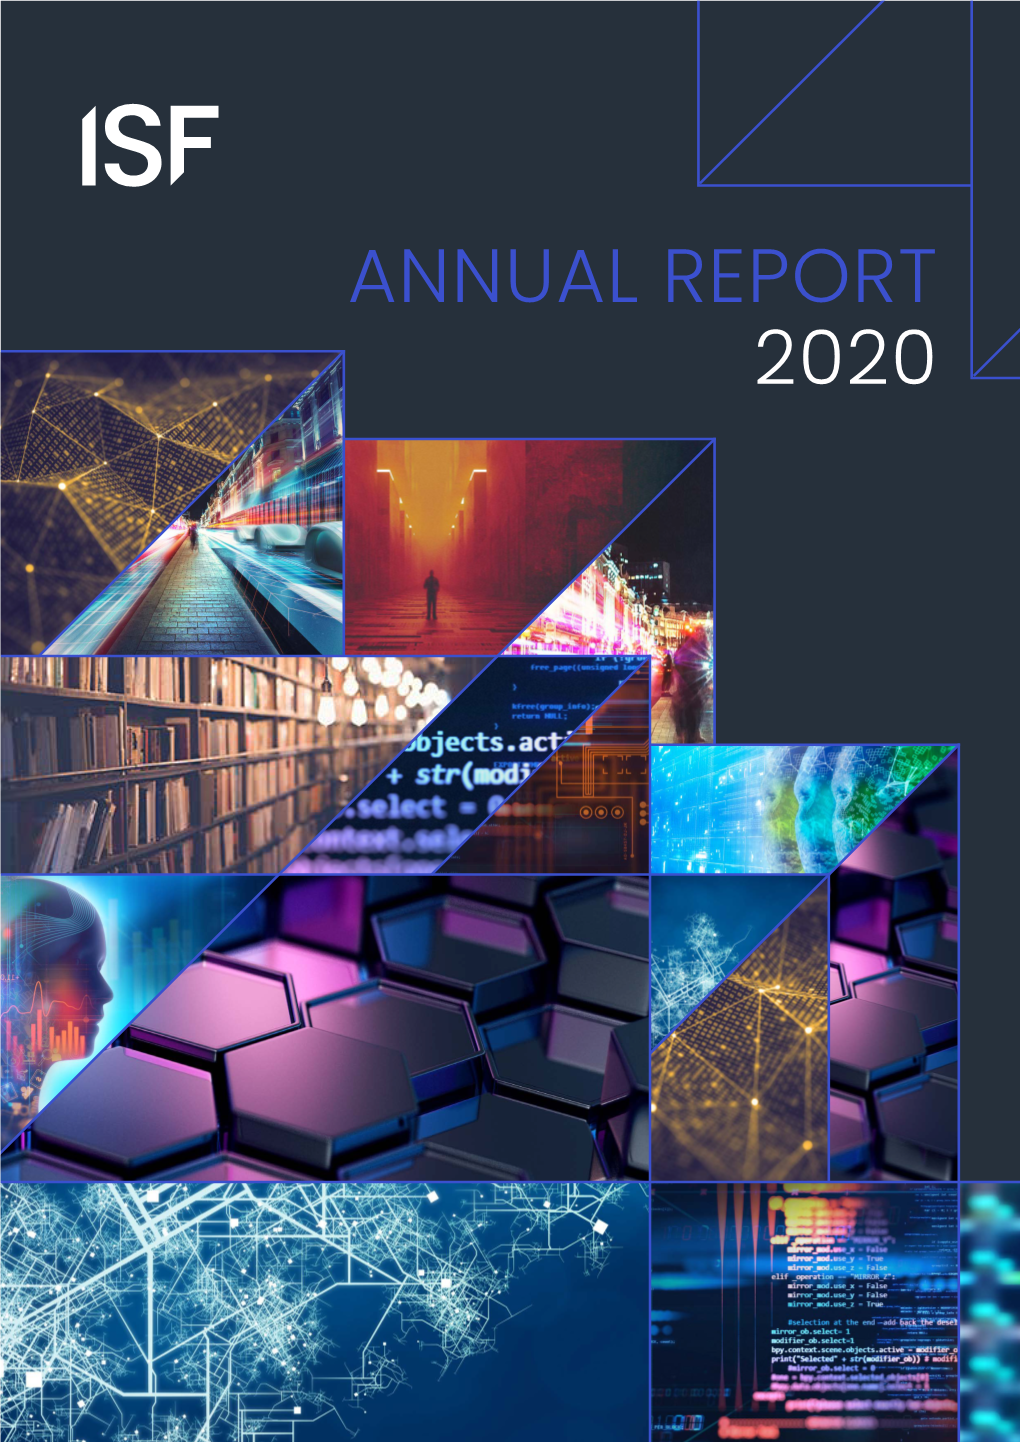 ISF ANNUAL REPORT 2020 April 2021